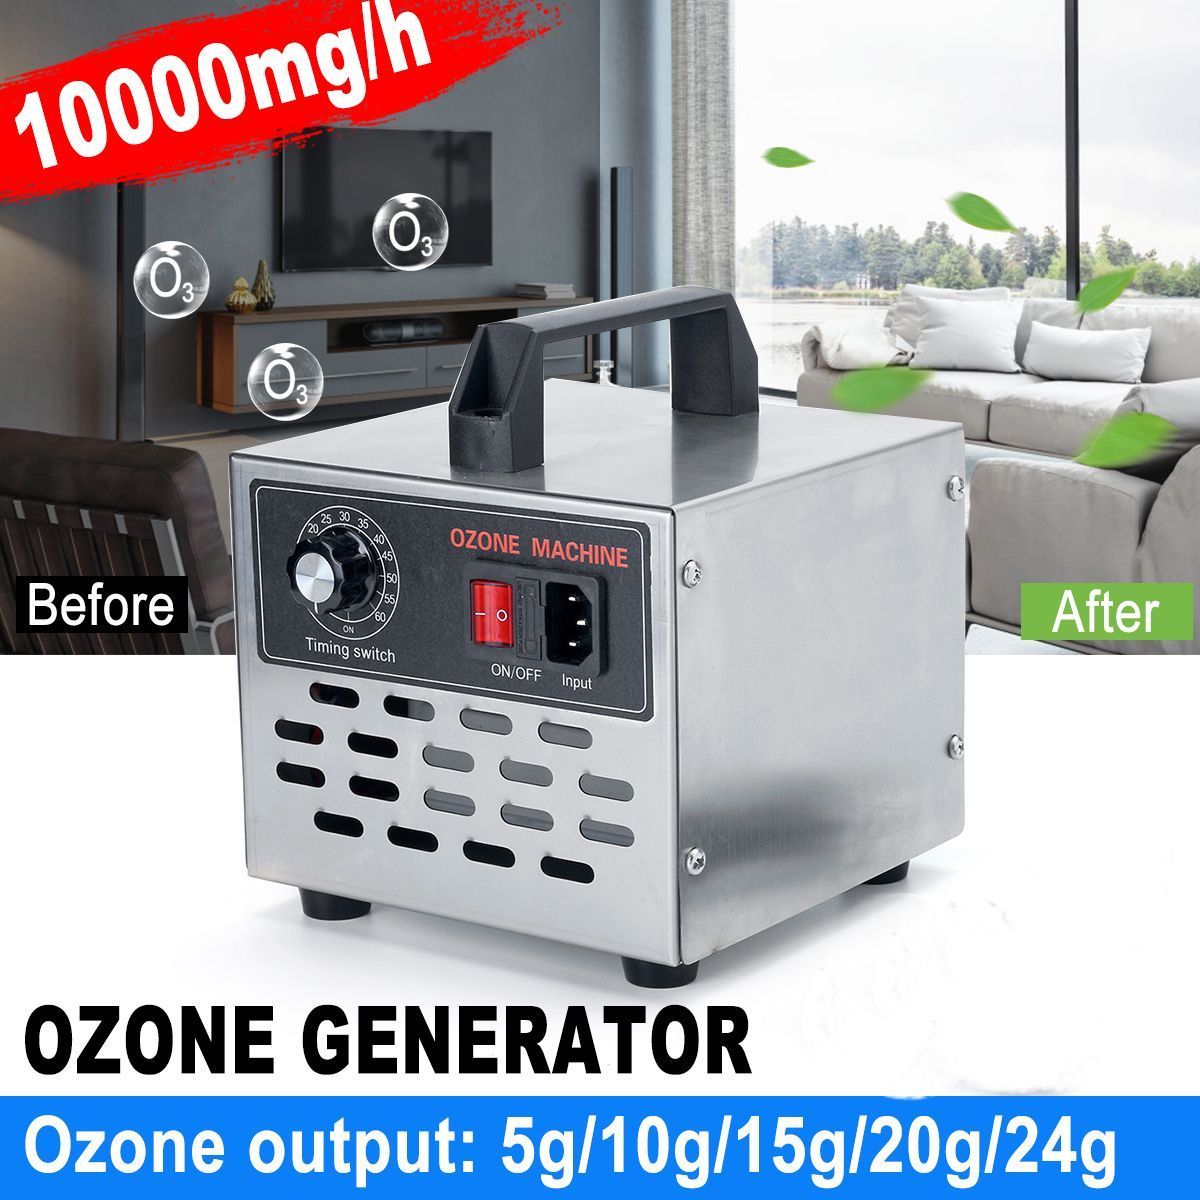 5g-24g-Ozone-Generator-Ozone-Machine-Stainless-Steel-Air-Purifier-Air-Cleaner-Disinfection-Cleaning-1678702